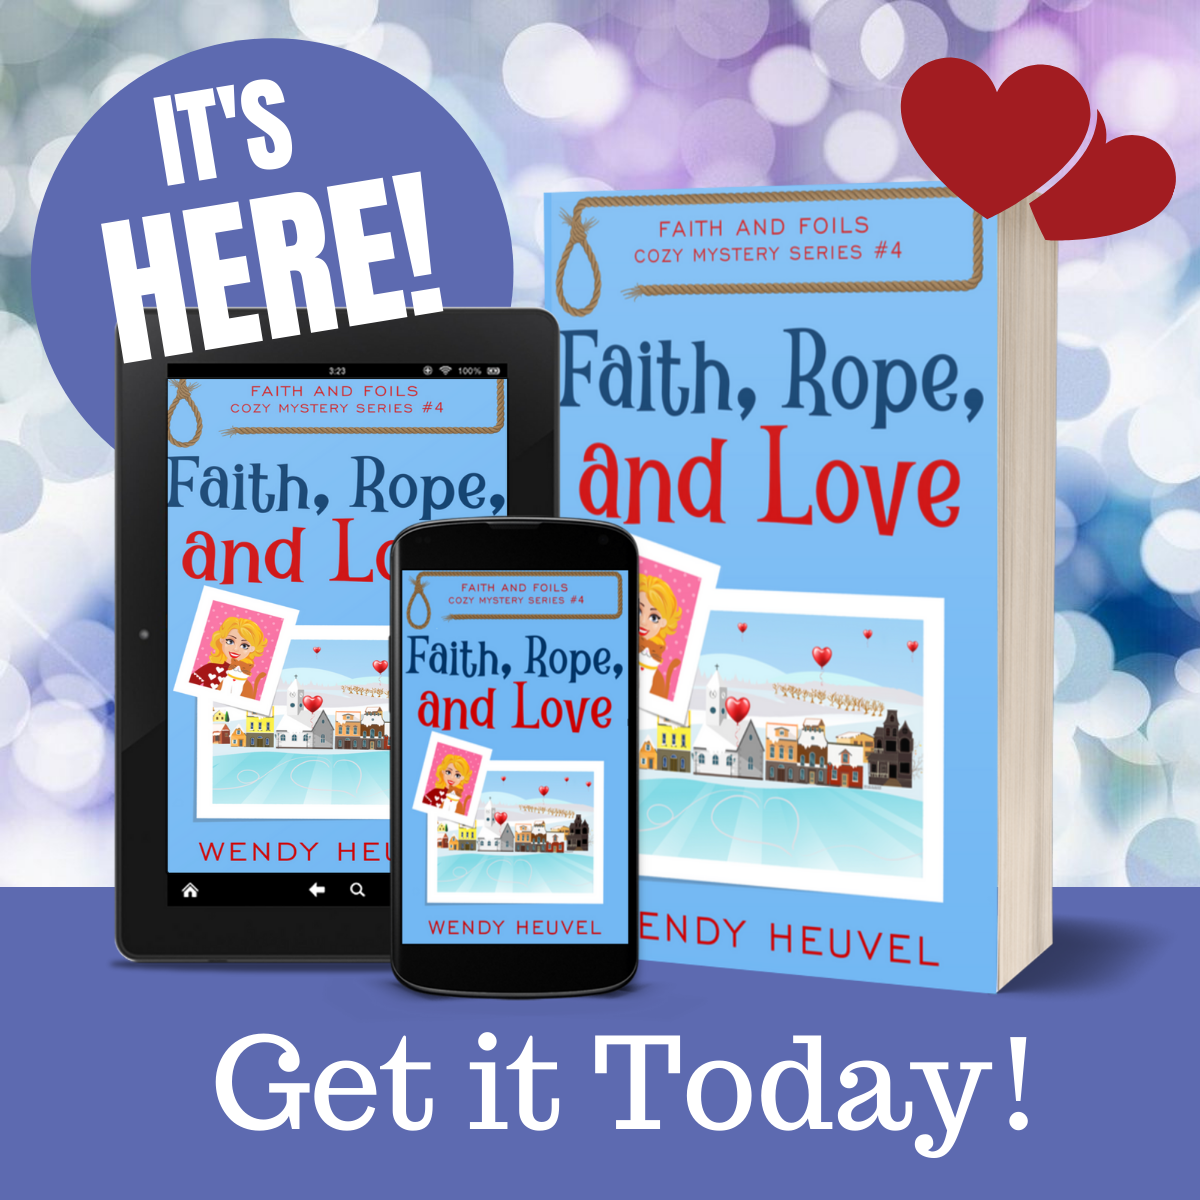 Faith, Rope & Love – IT’S RELEASE DAY TODAY!